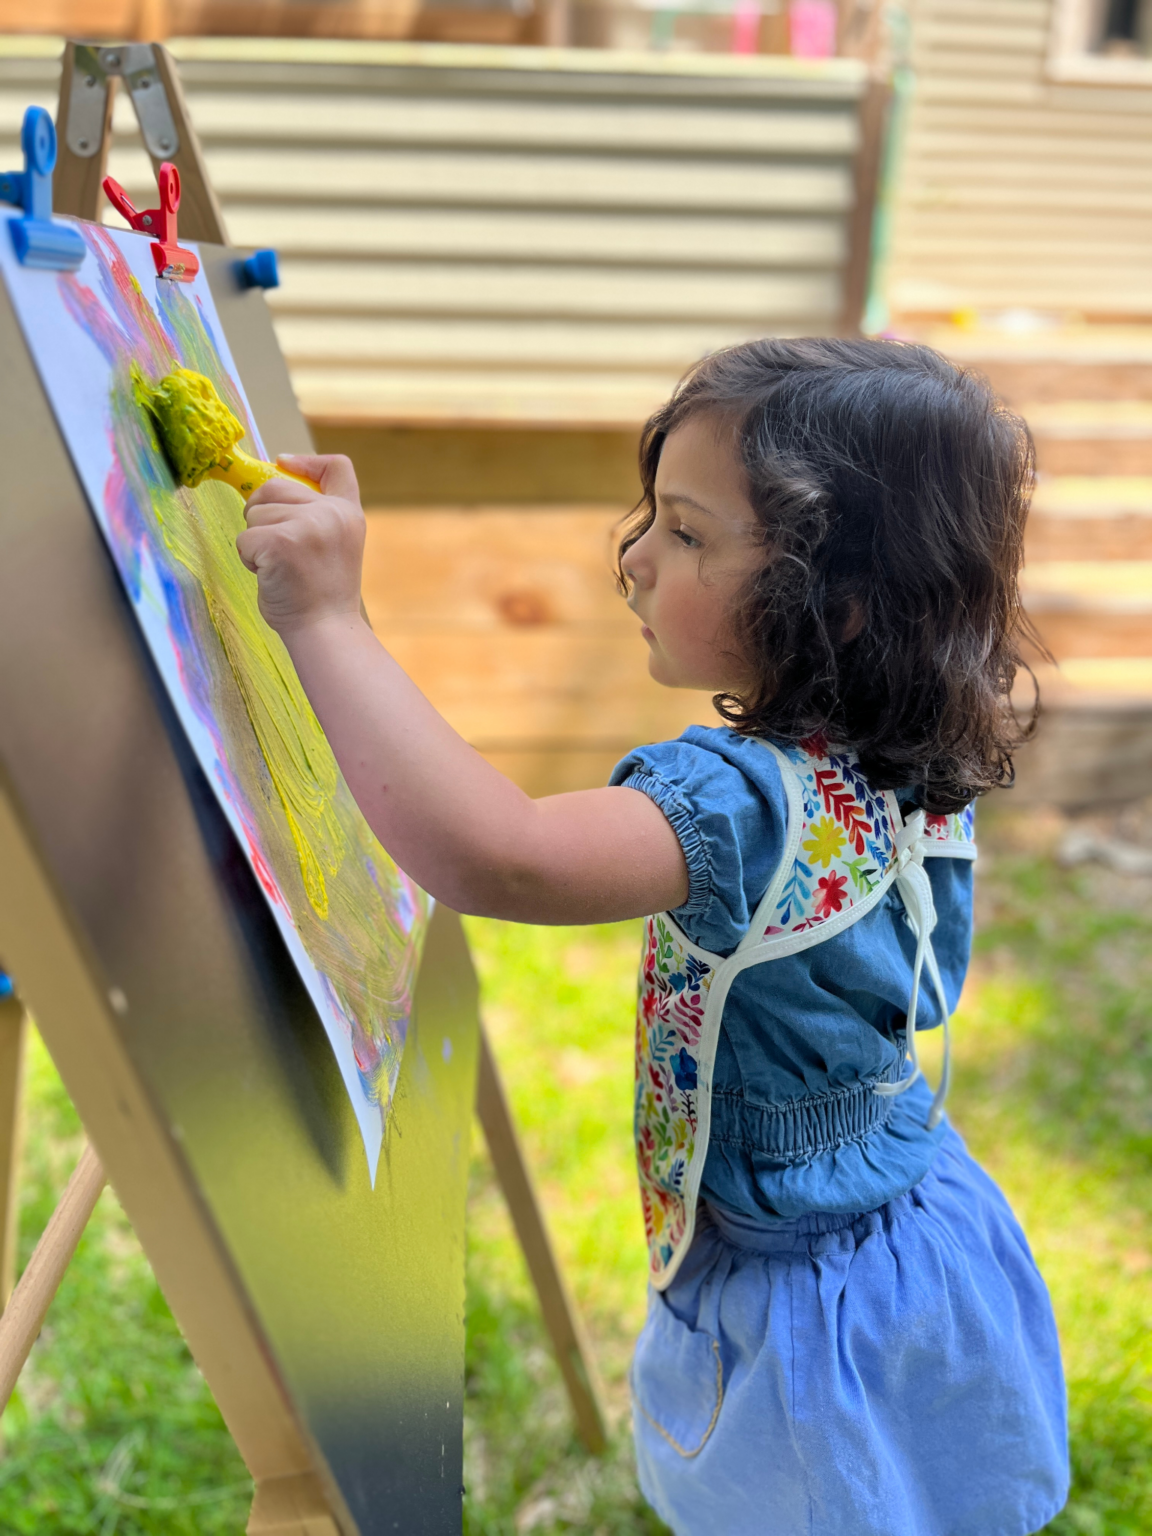 11 Ways to Have a Creative Summer with Kids